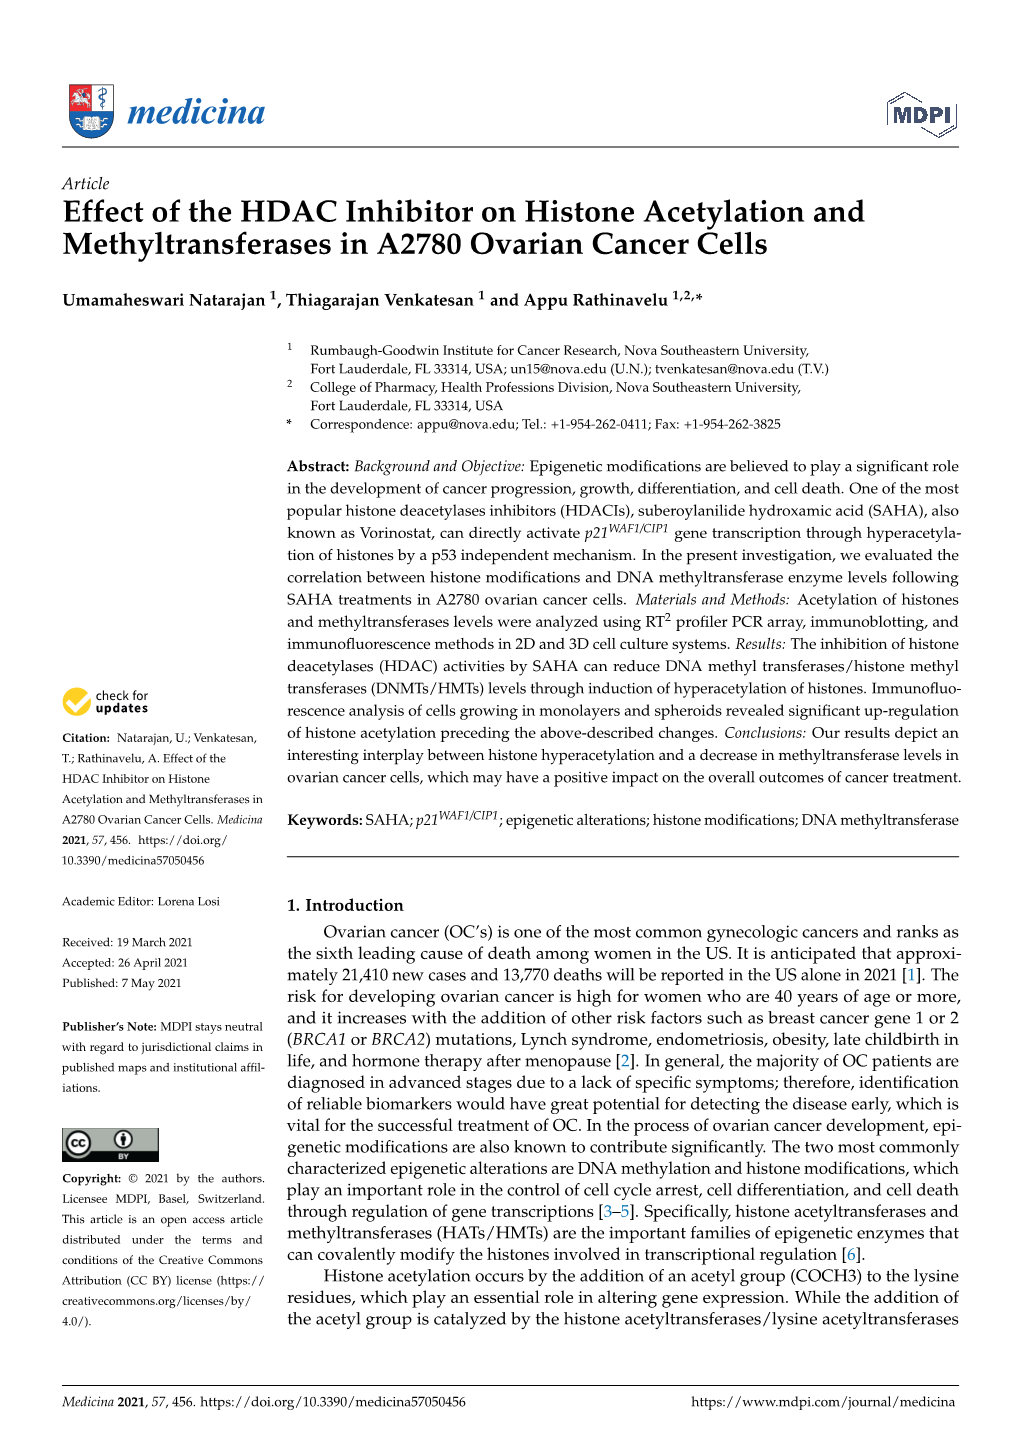 Effect of the HDAC Inhibitor on Histone Acetylation and Methyltransferases in A2780 Ovarian Cancer Cells